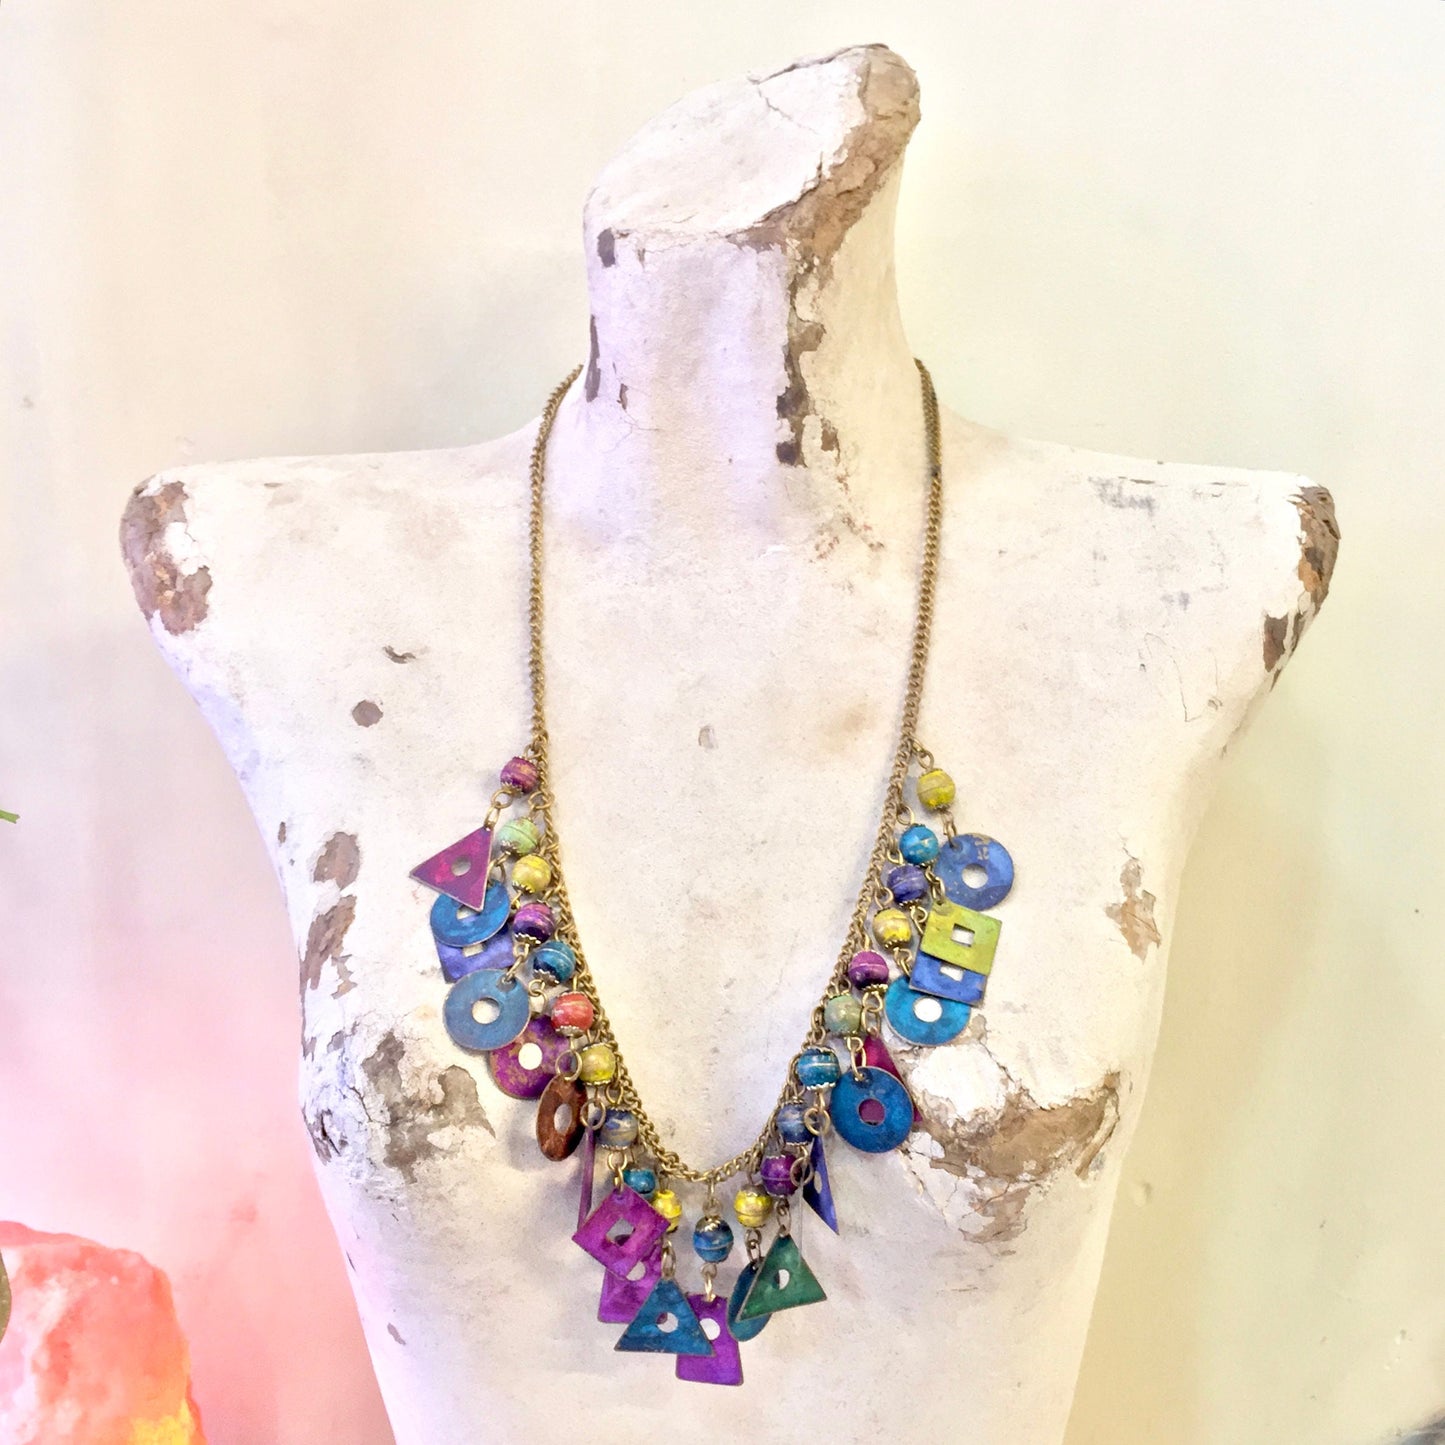 Vintage charm necklace with colorful metal beads, dangling ornaments, and gold chain, displayed on white mannequin bust. Unique costume jewelry piece, perfect for a holiday gift.